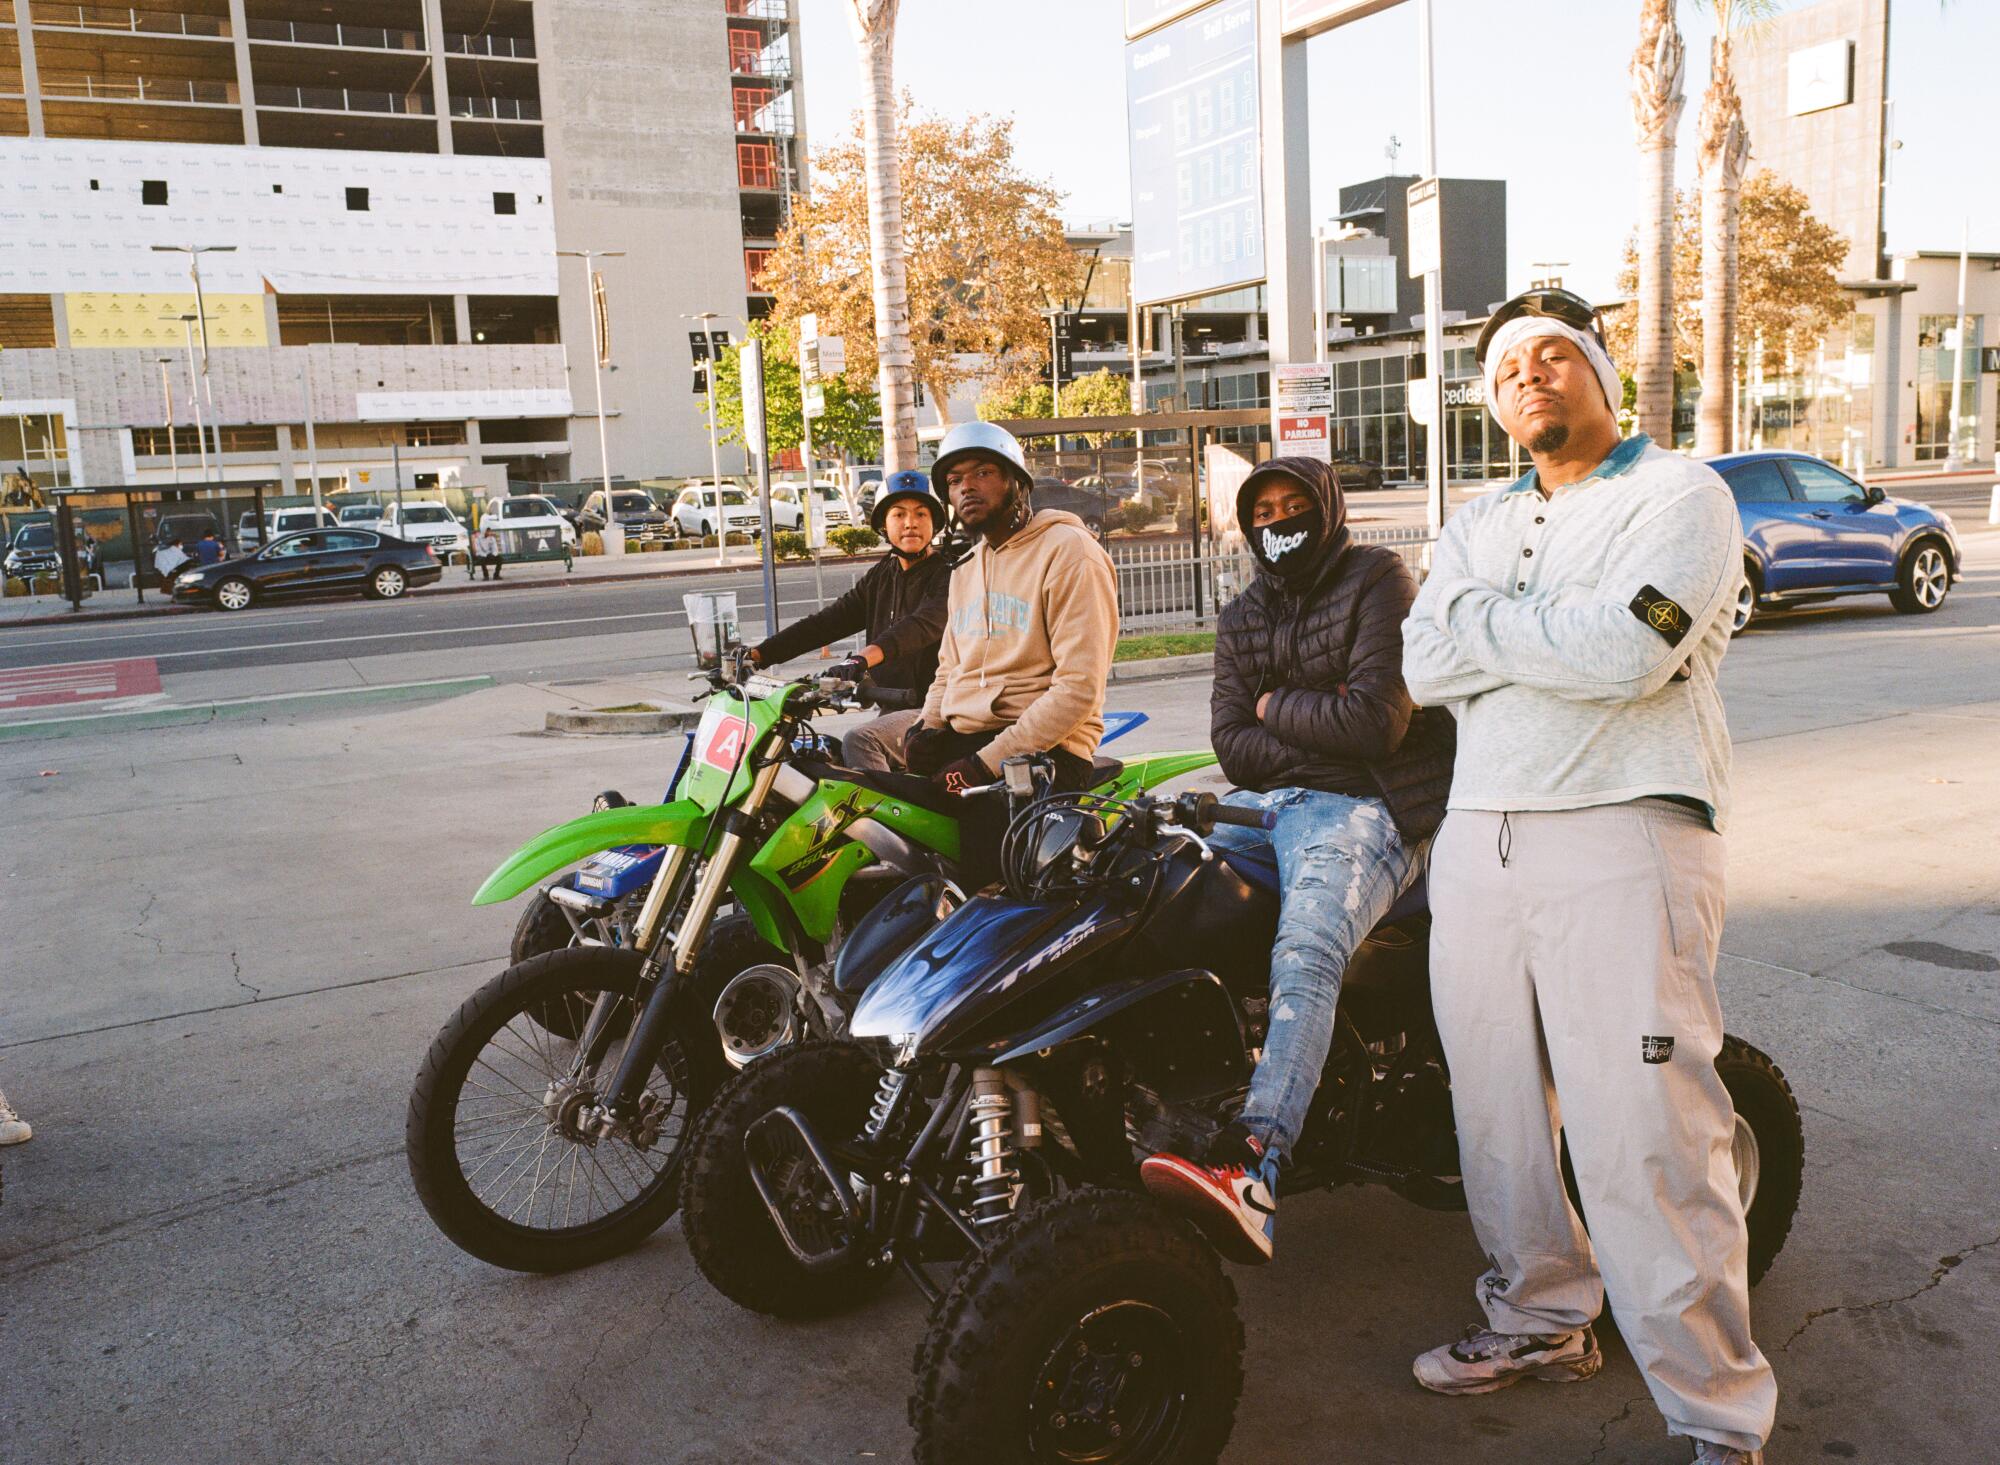 Three men sit on dirt bikes on a city street while a fourth stands next to them, arms folded.